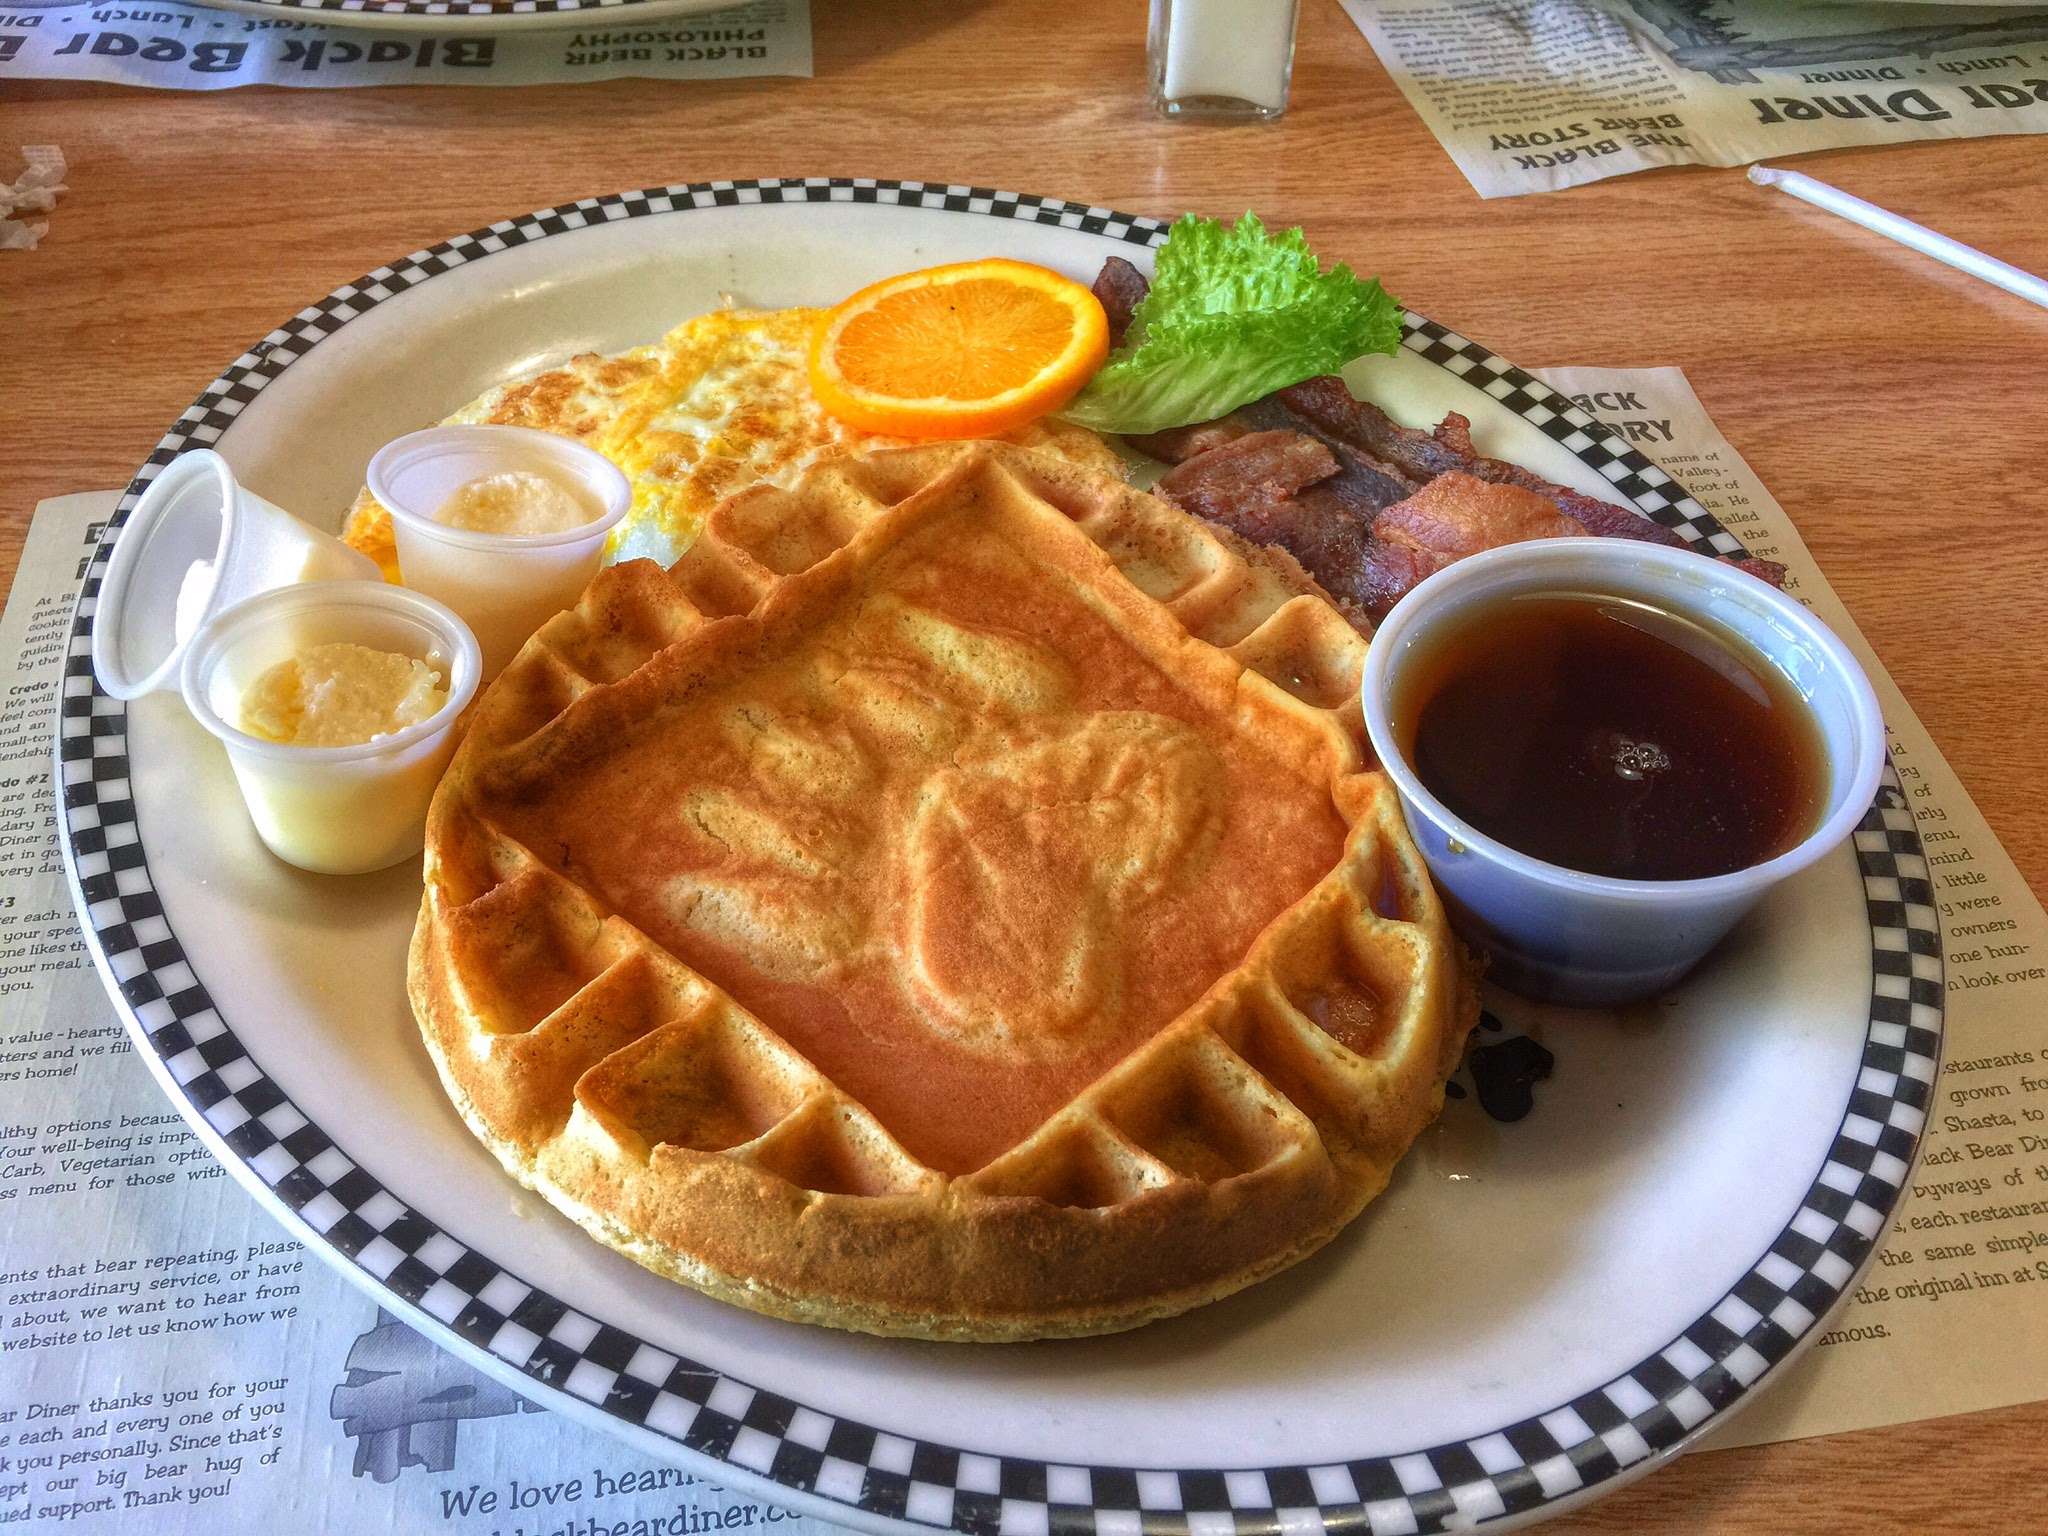 ...this dinner downtown that will make your waffle in the shape of a bear footprint...and yeah, man, it was as good as it looks, oh by the way...